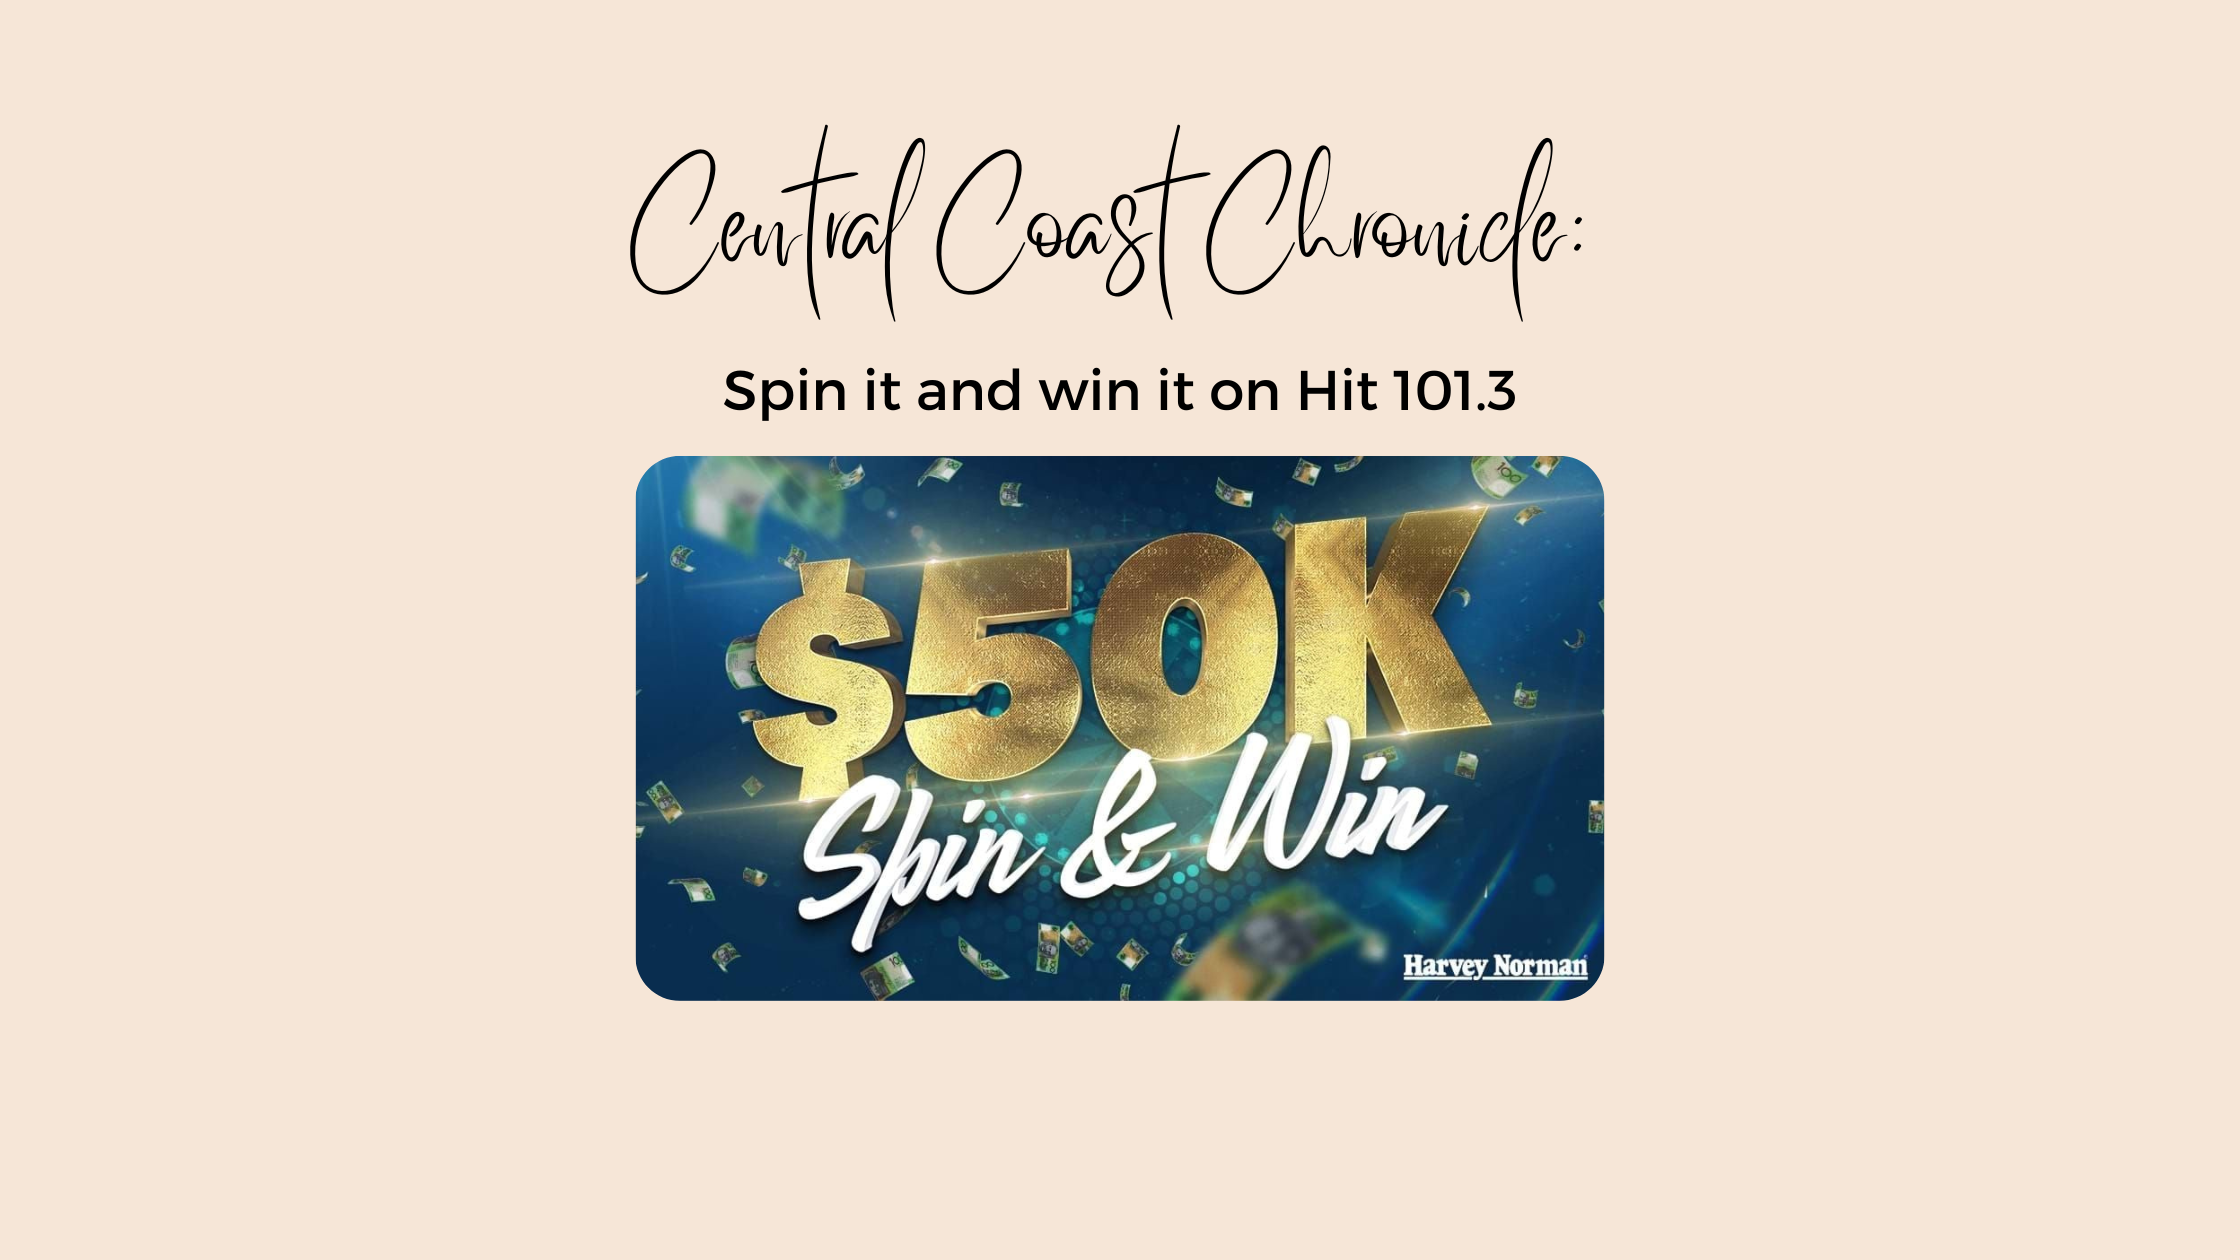 Spin it and win it on Hit 101.3